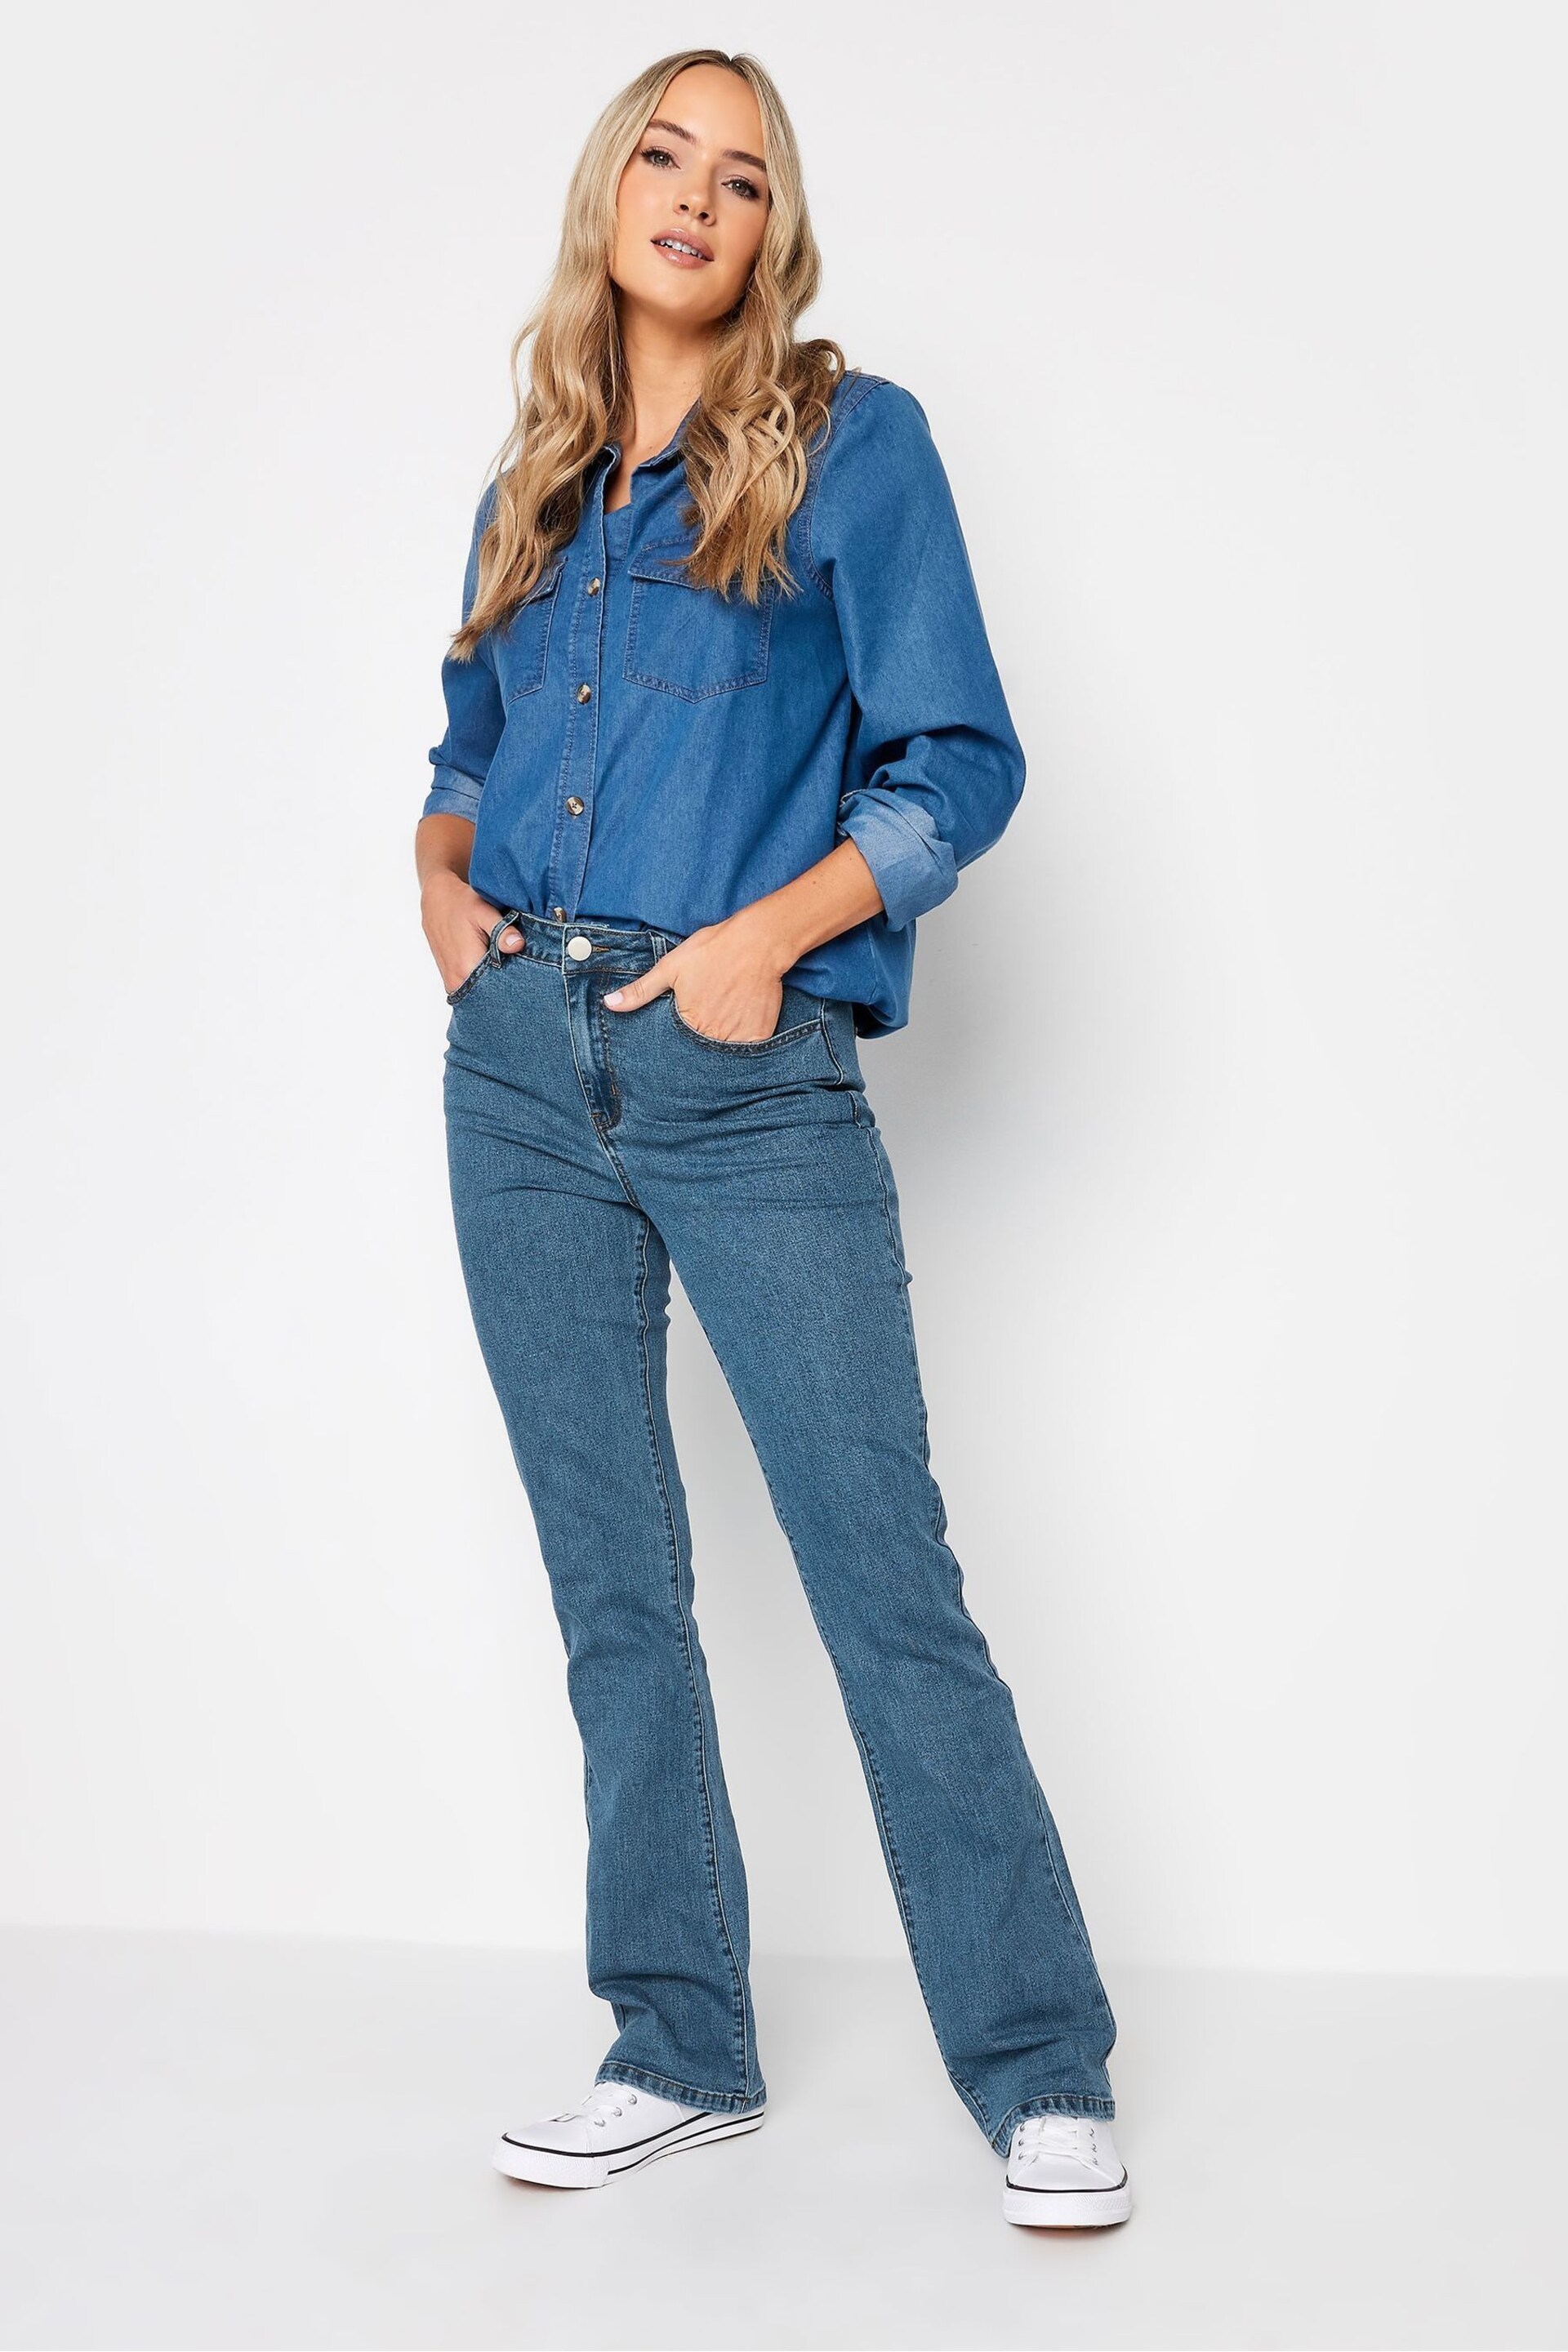 Long Tall Sally Blue Bootcut Jeans - Image 3 of 4